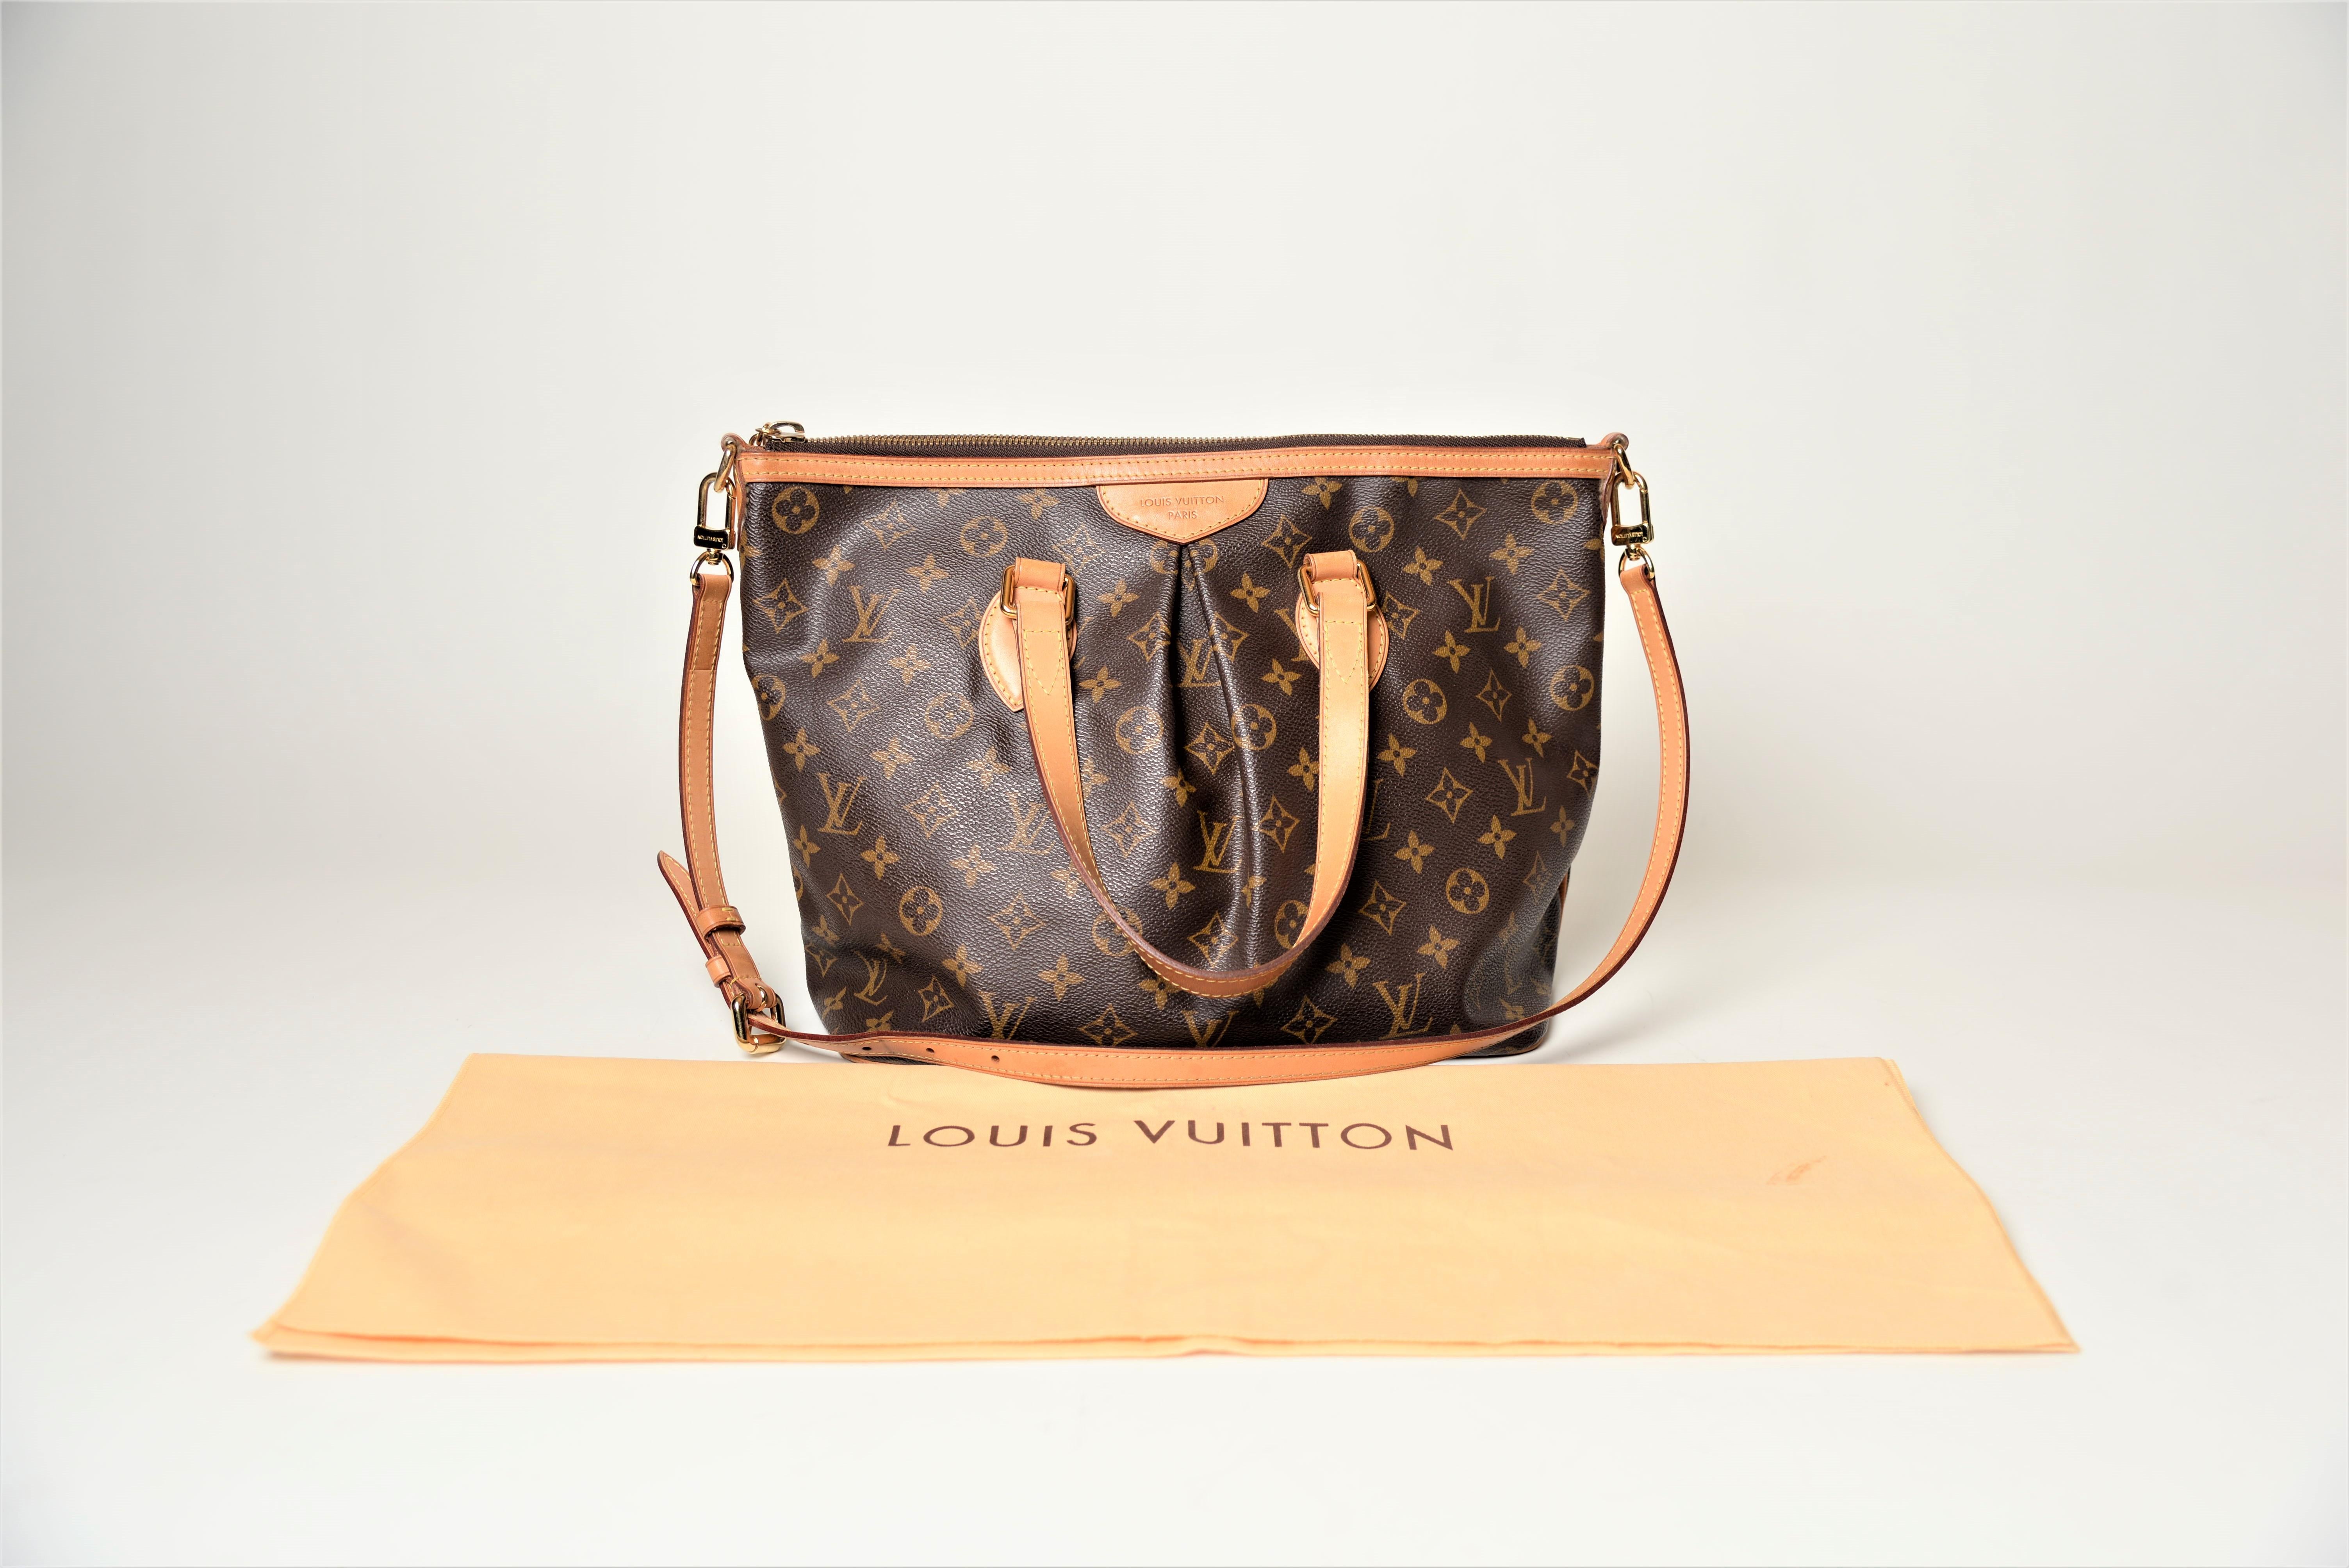 From the collection of SAVINETI we offer this Louis Vuitton Palermo:
-	Brand: Louis Vuitton
-	Model: Palermo
-	Year: 2011
-	Code: SR2131
-	Condition: Good
-	Materials: Monogram Canvas, Leather
-	Extras: strap, original dustbag

We at SAVINETI sell